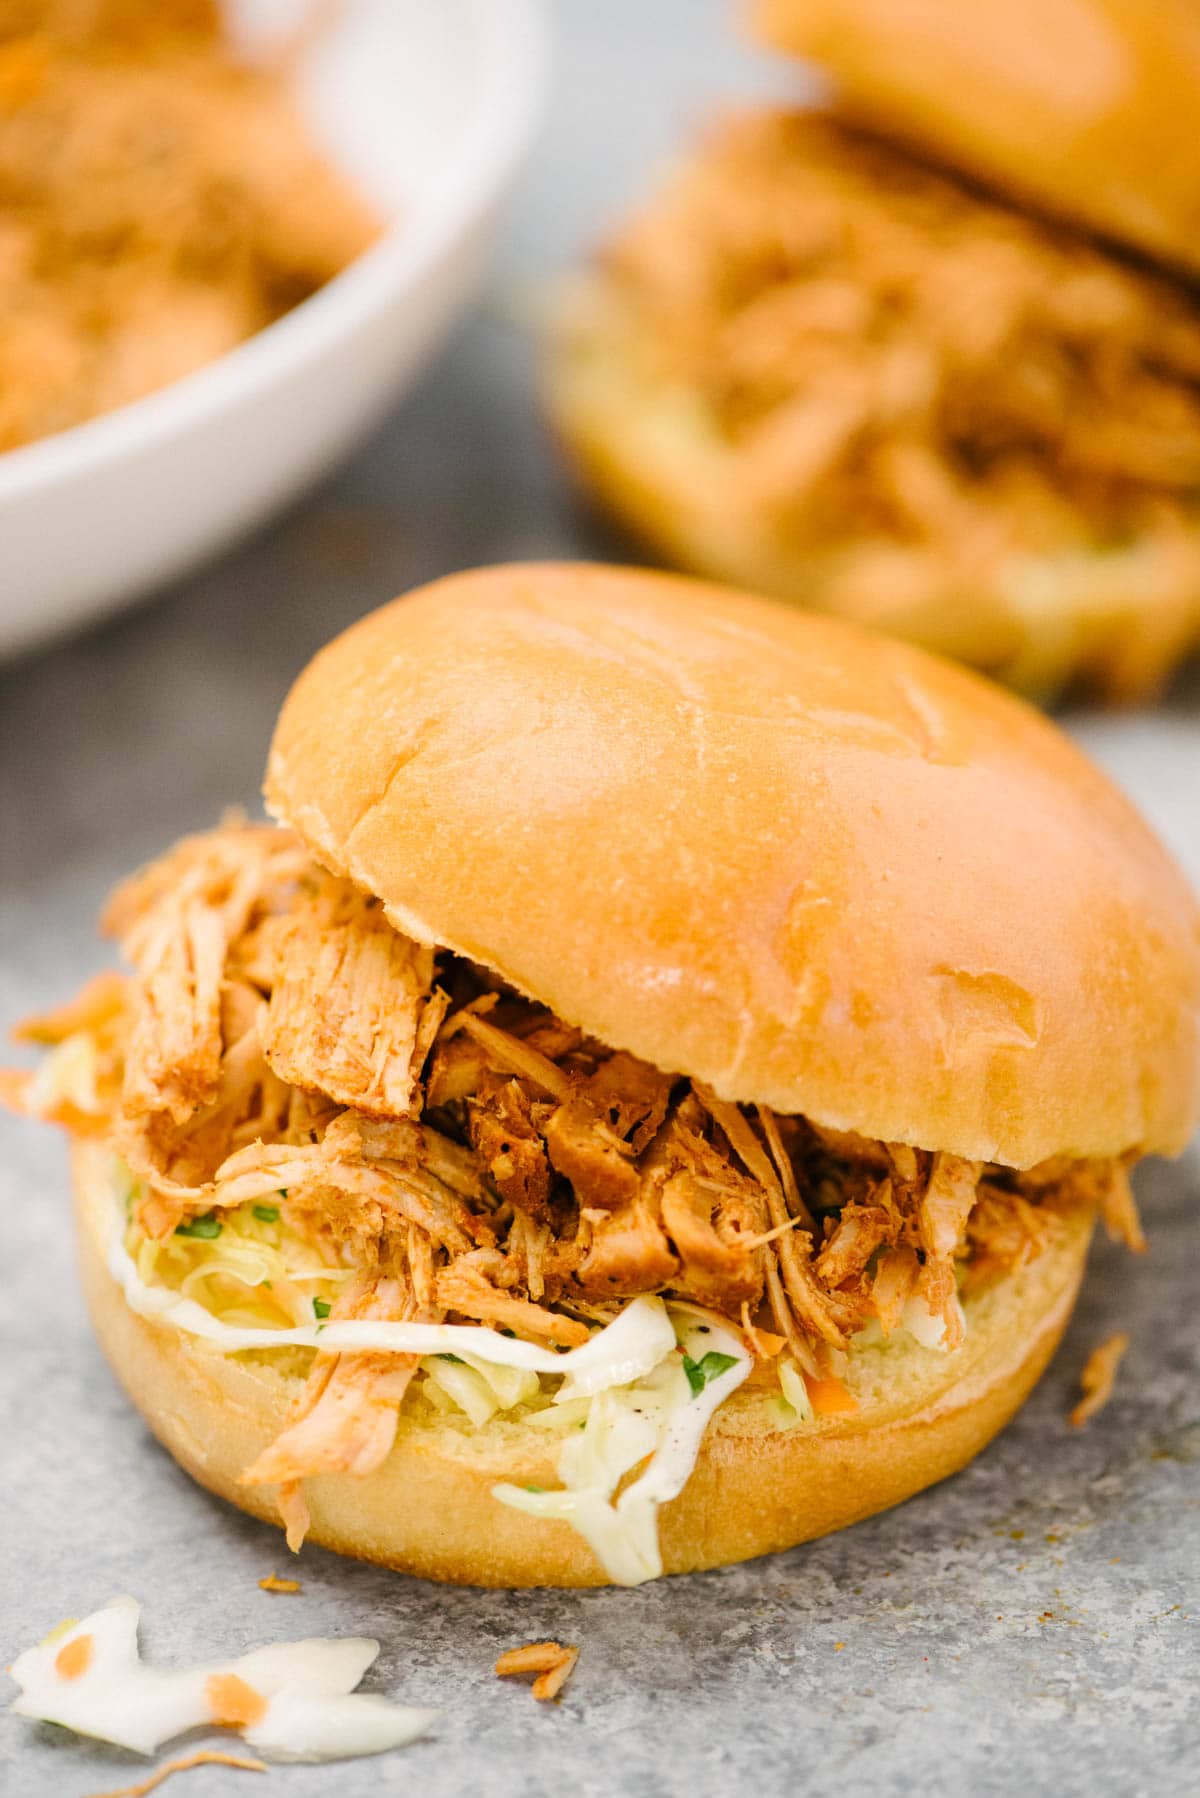 Side view, slow cooker pulled pork sandwich with coleslaw on a brioche bun; a serving bowl of pulled pork and a second sandwich are in the background.